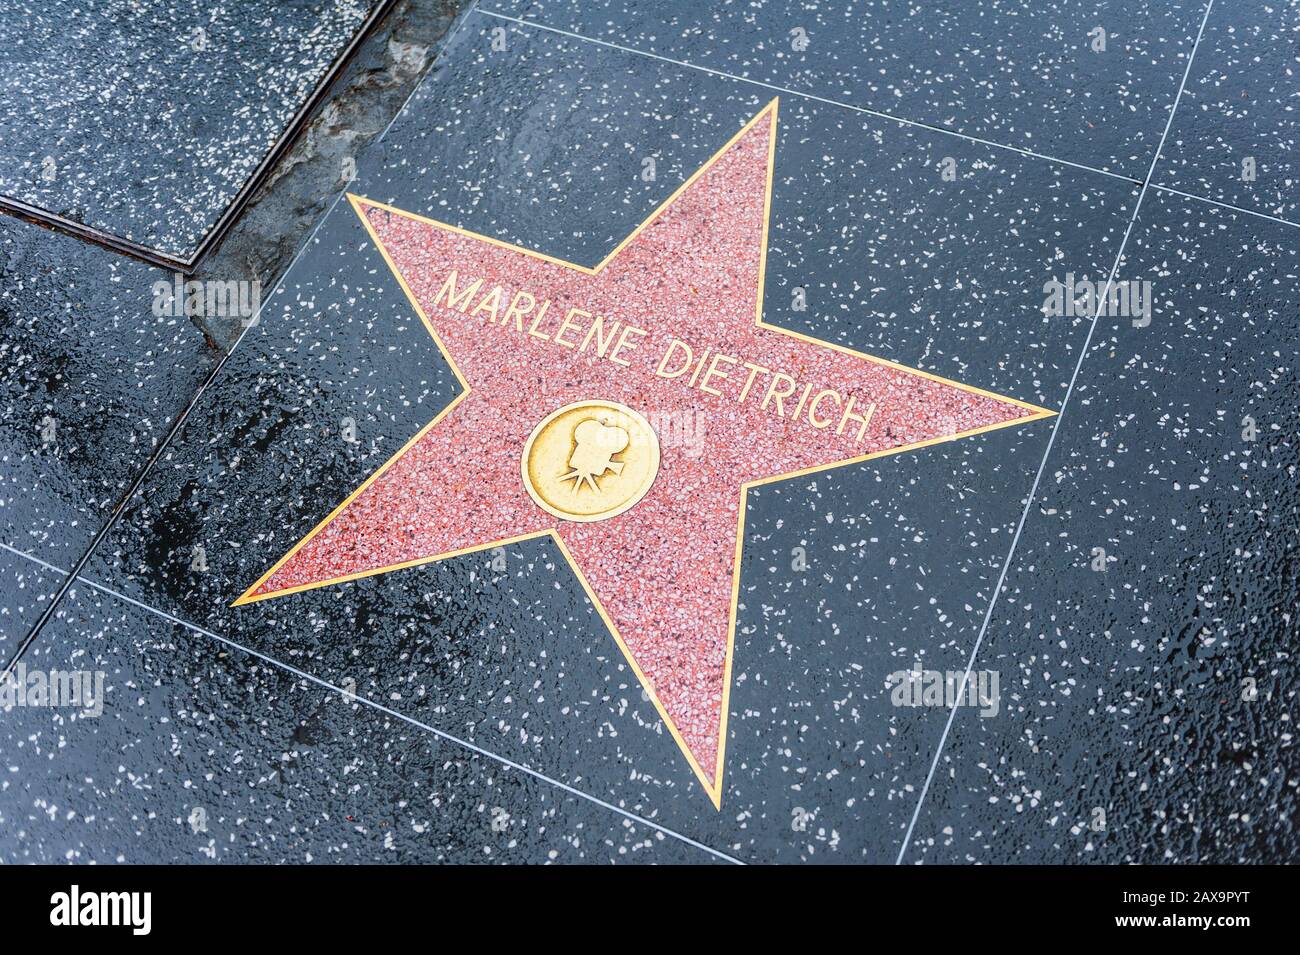 Marlene Dietrich star on Hollywood Walk of Fame in Hollywood, California, USA. She was a German-American actress and singer, active from 1919-1984. Stock Photo